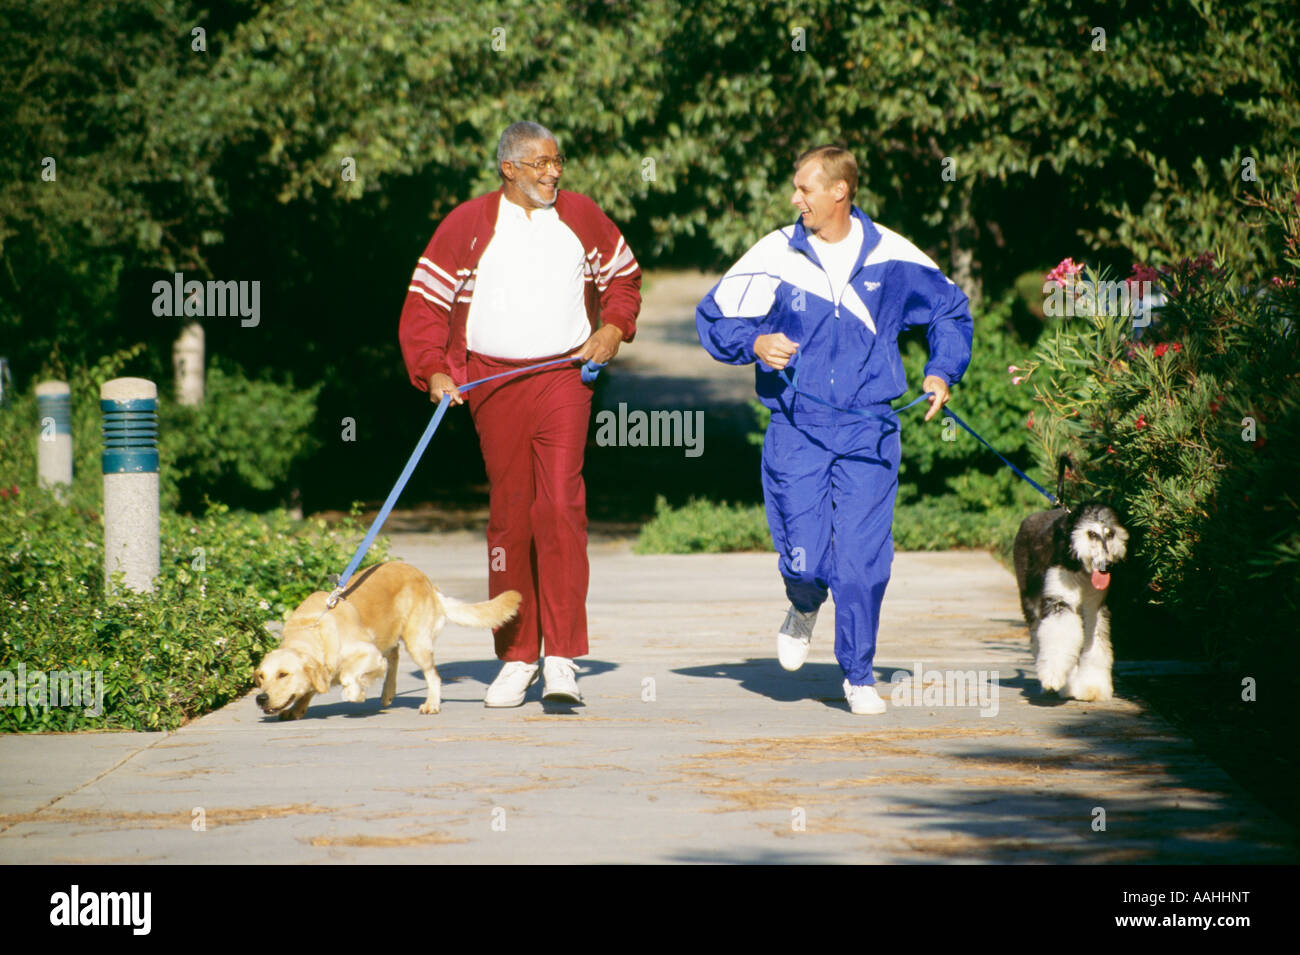 Senior men exercising running  jogging with pet dogs Afgan hound Golden Retriever warm-up suits ethnic diverse African American Stock Photo